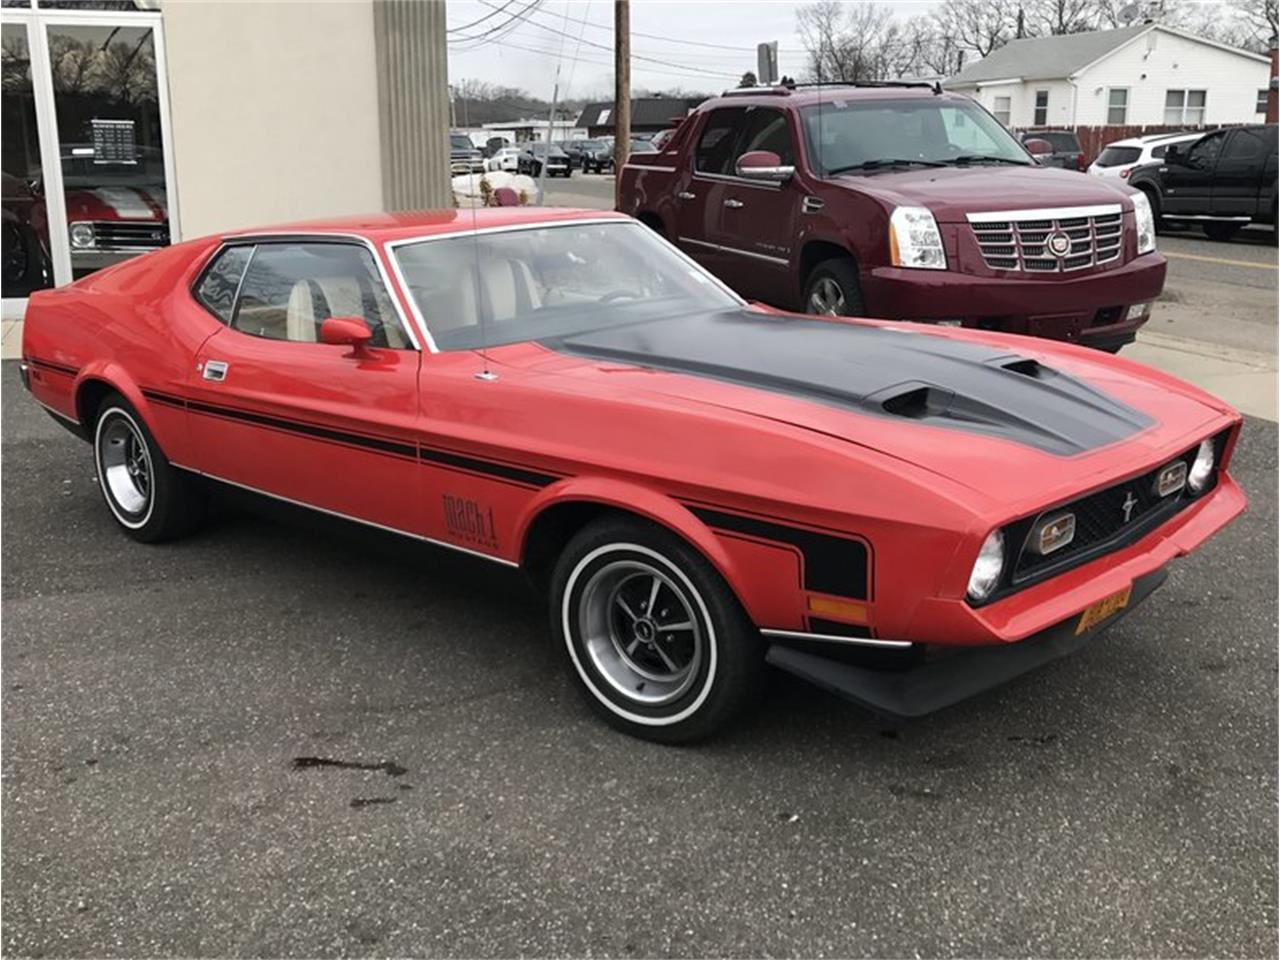 1971 Ford Mustang Mach 1 for Sale | ClassicCars.com | CC-1058563